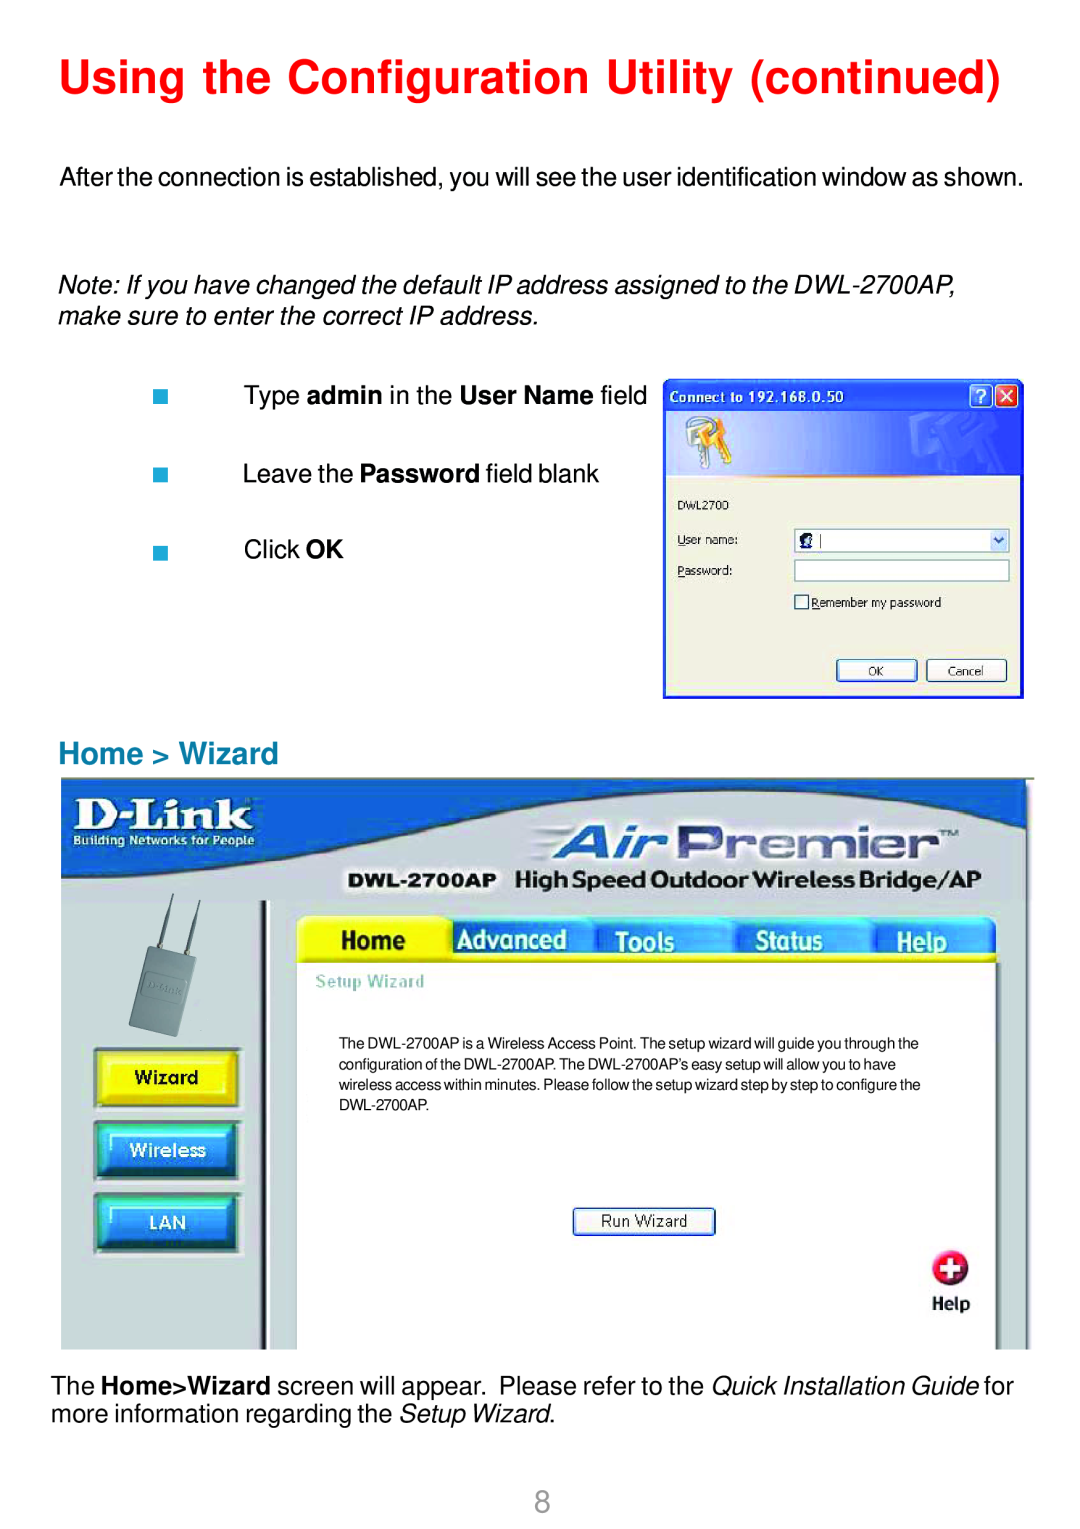 D-Link DWL-2700AP warranty Using the Configuration Utility continued, Home Wizard 